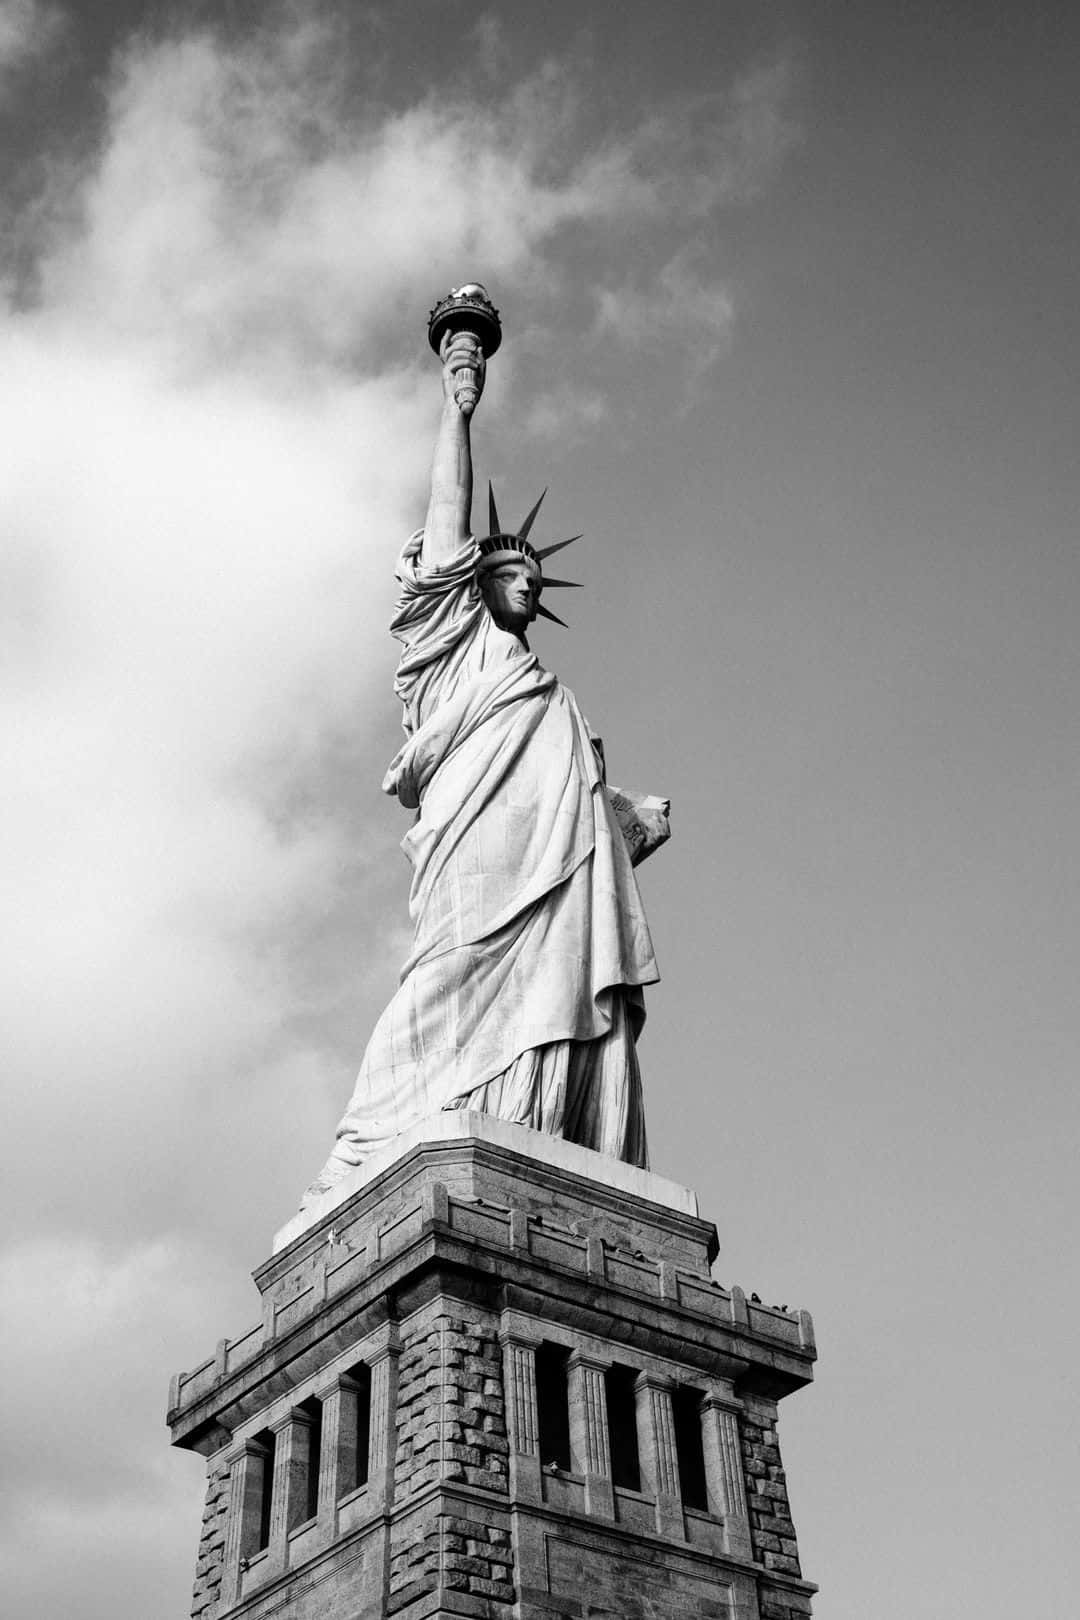 The Statue Of Liberty Is Shown In Black And White